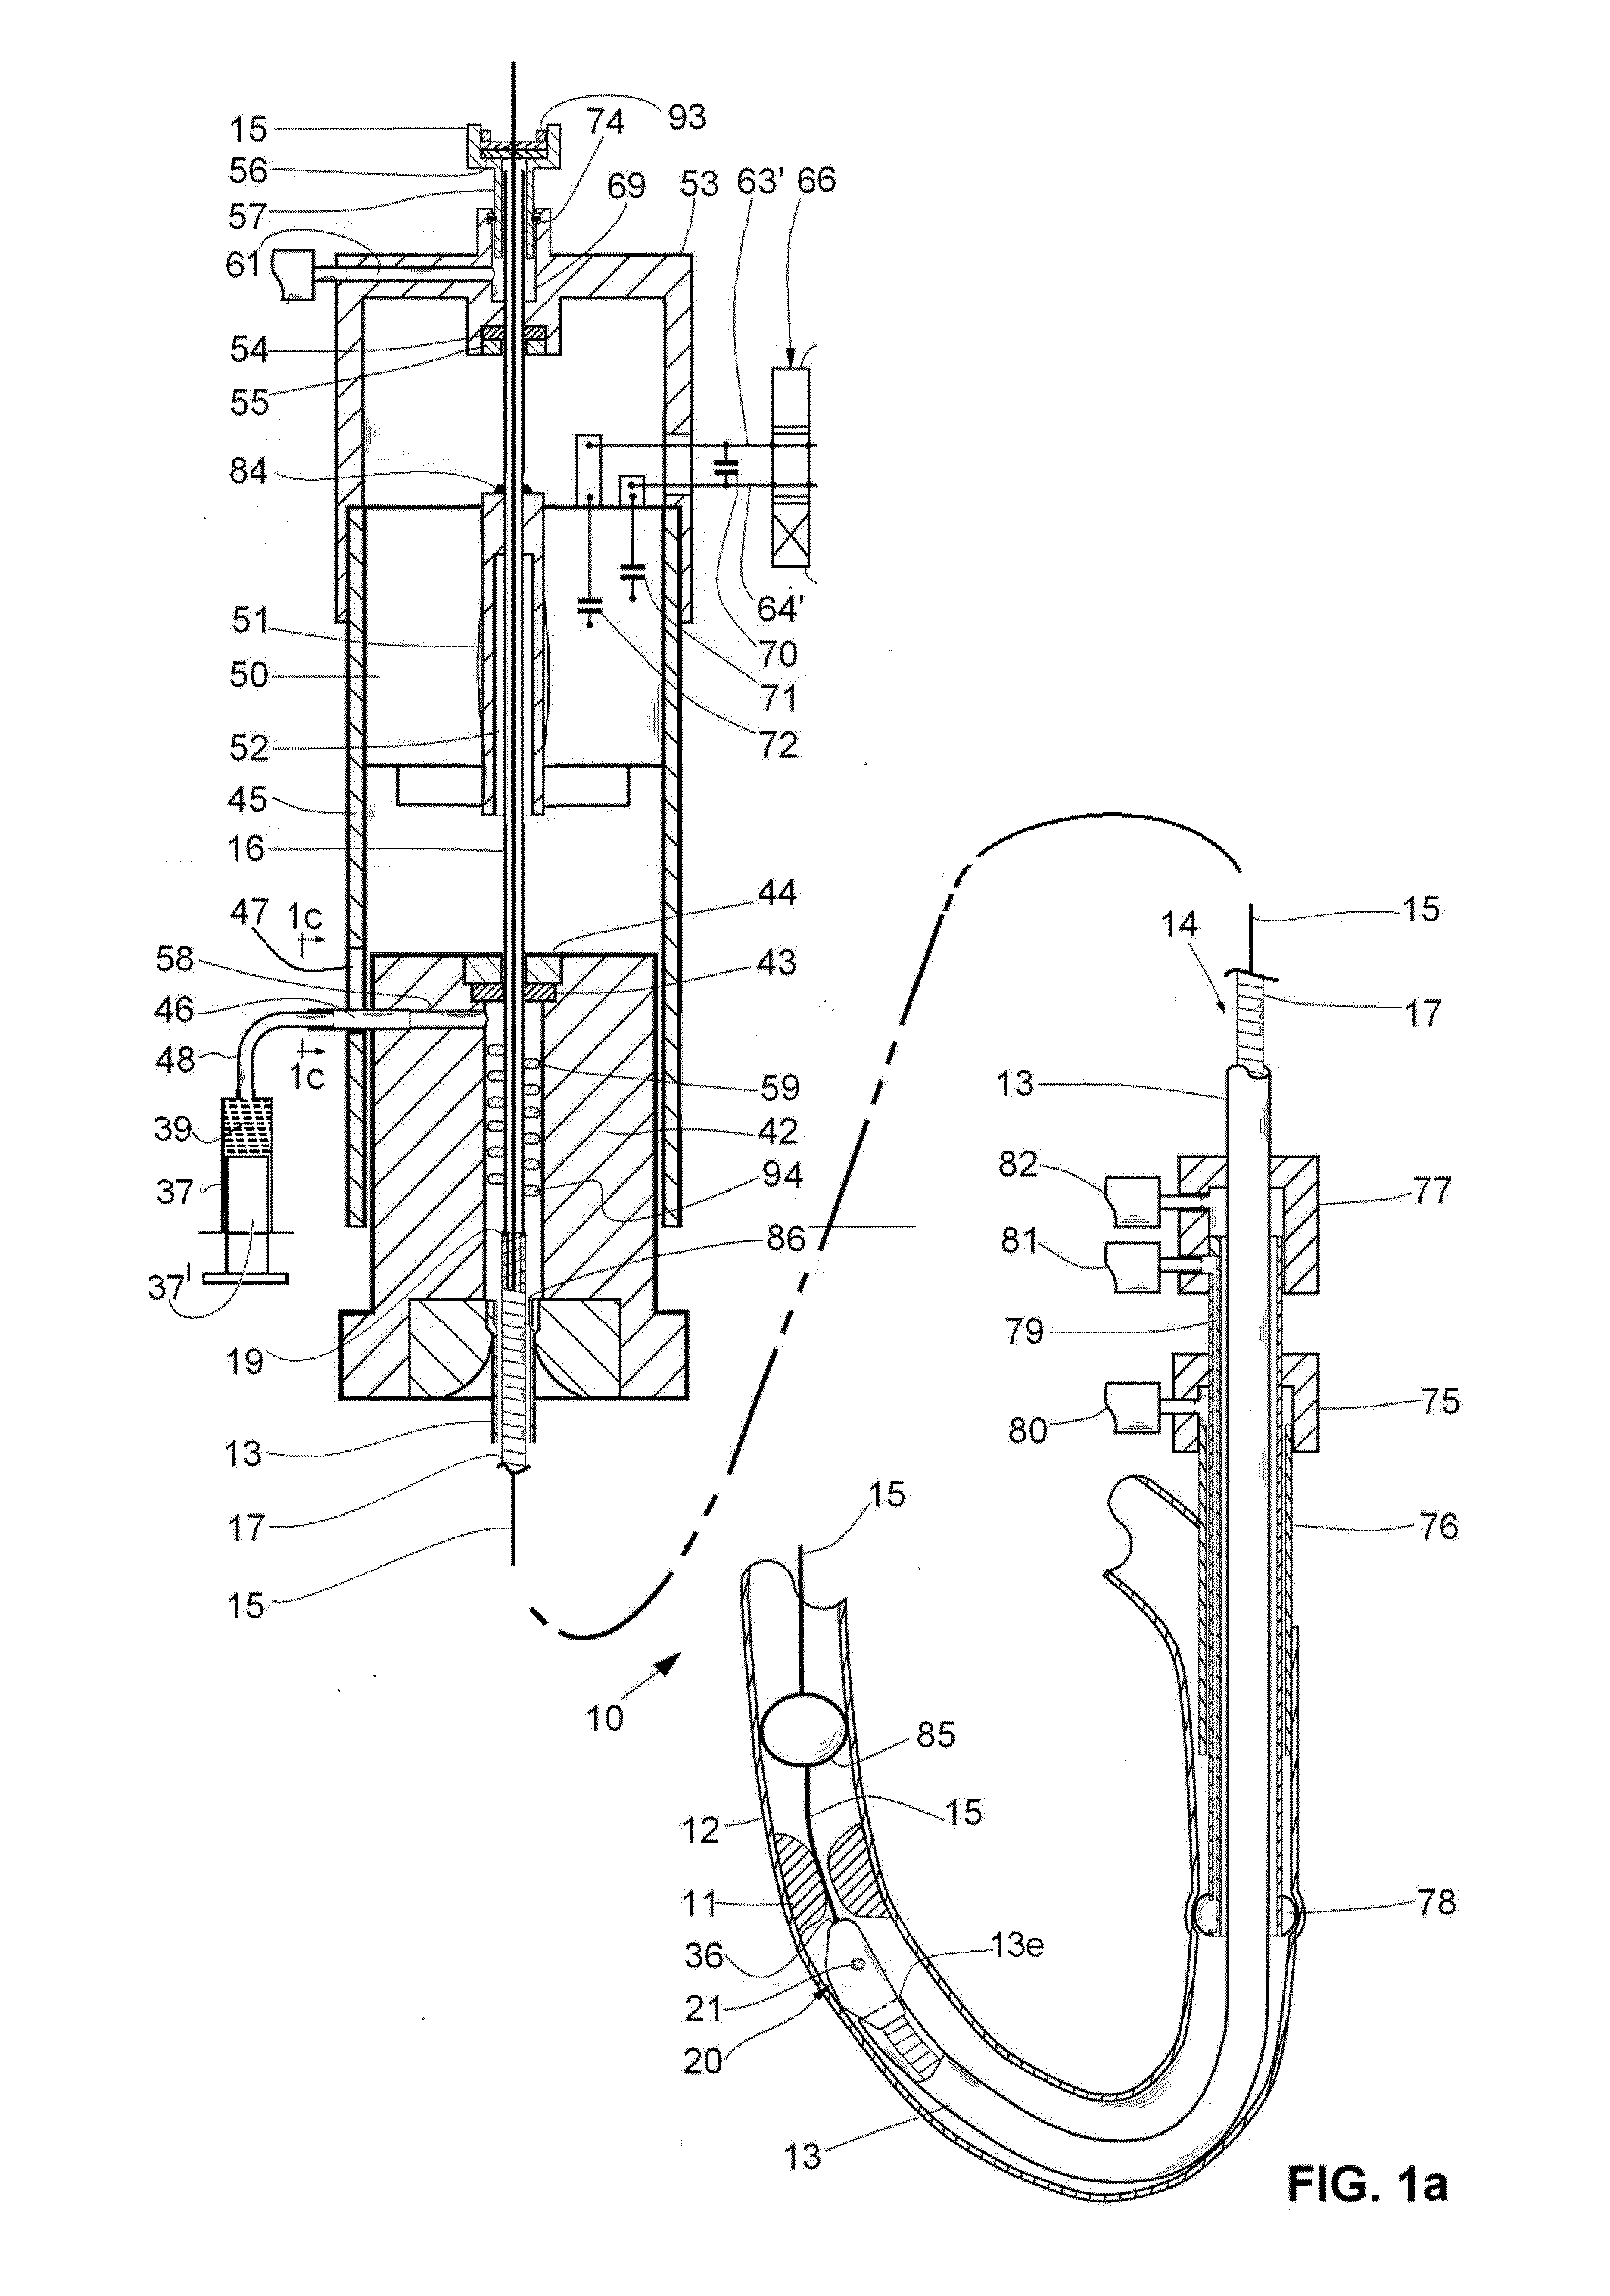 Mechanical - pharmaceutical system for opening obstructed bodily vessels